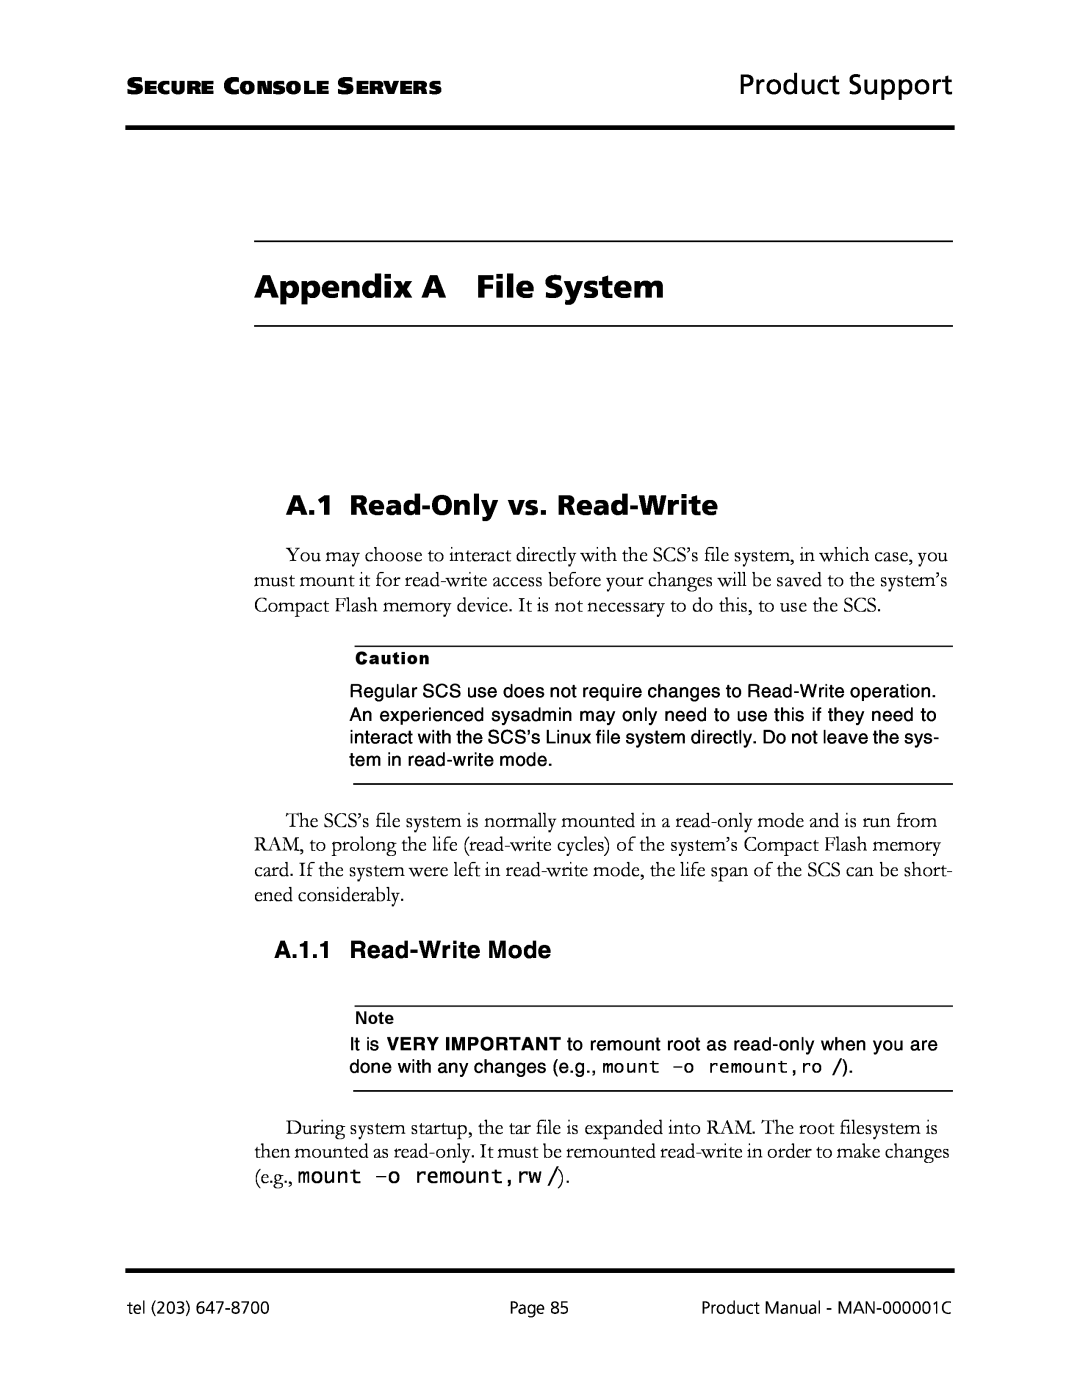 Logical Solutions SCS-R Appendix A File System, A.1 Read-Only vs. Read-Write, A.1.1 Read-Write Mode, Product Support 